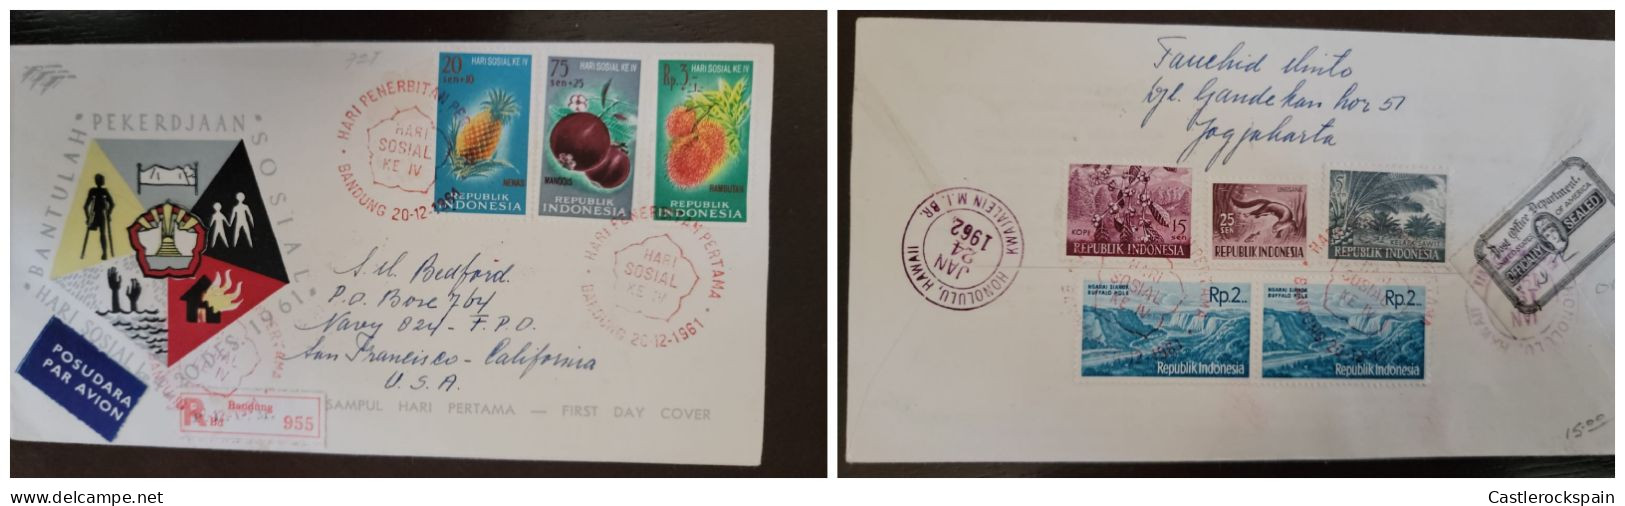 O) 1962 INDONESIA, OFFICIALLY SEALED,  POST OFFICE DEPARTMENT, EXOTIC FRUITS, COFFEE,OIL PALMS,  BUFFALO HOLE - FOR TOUR - Indonesien